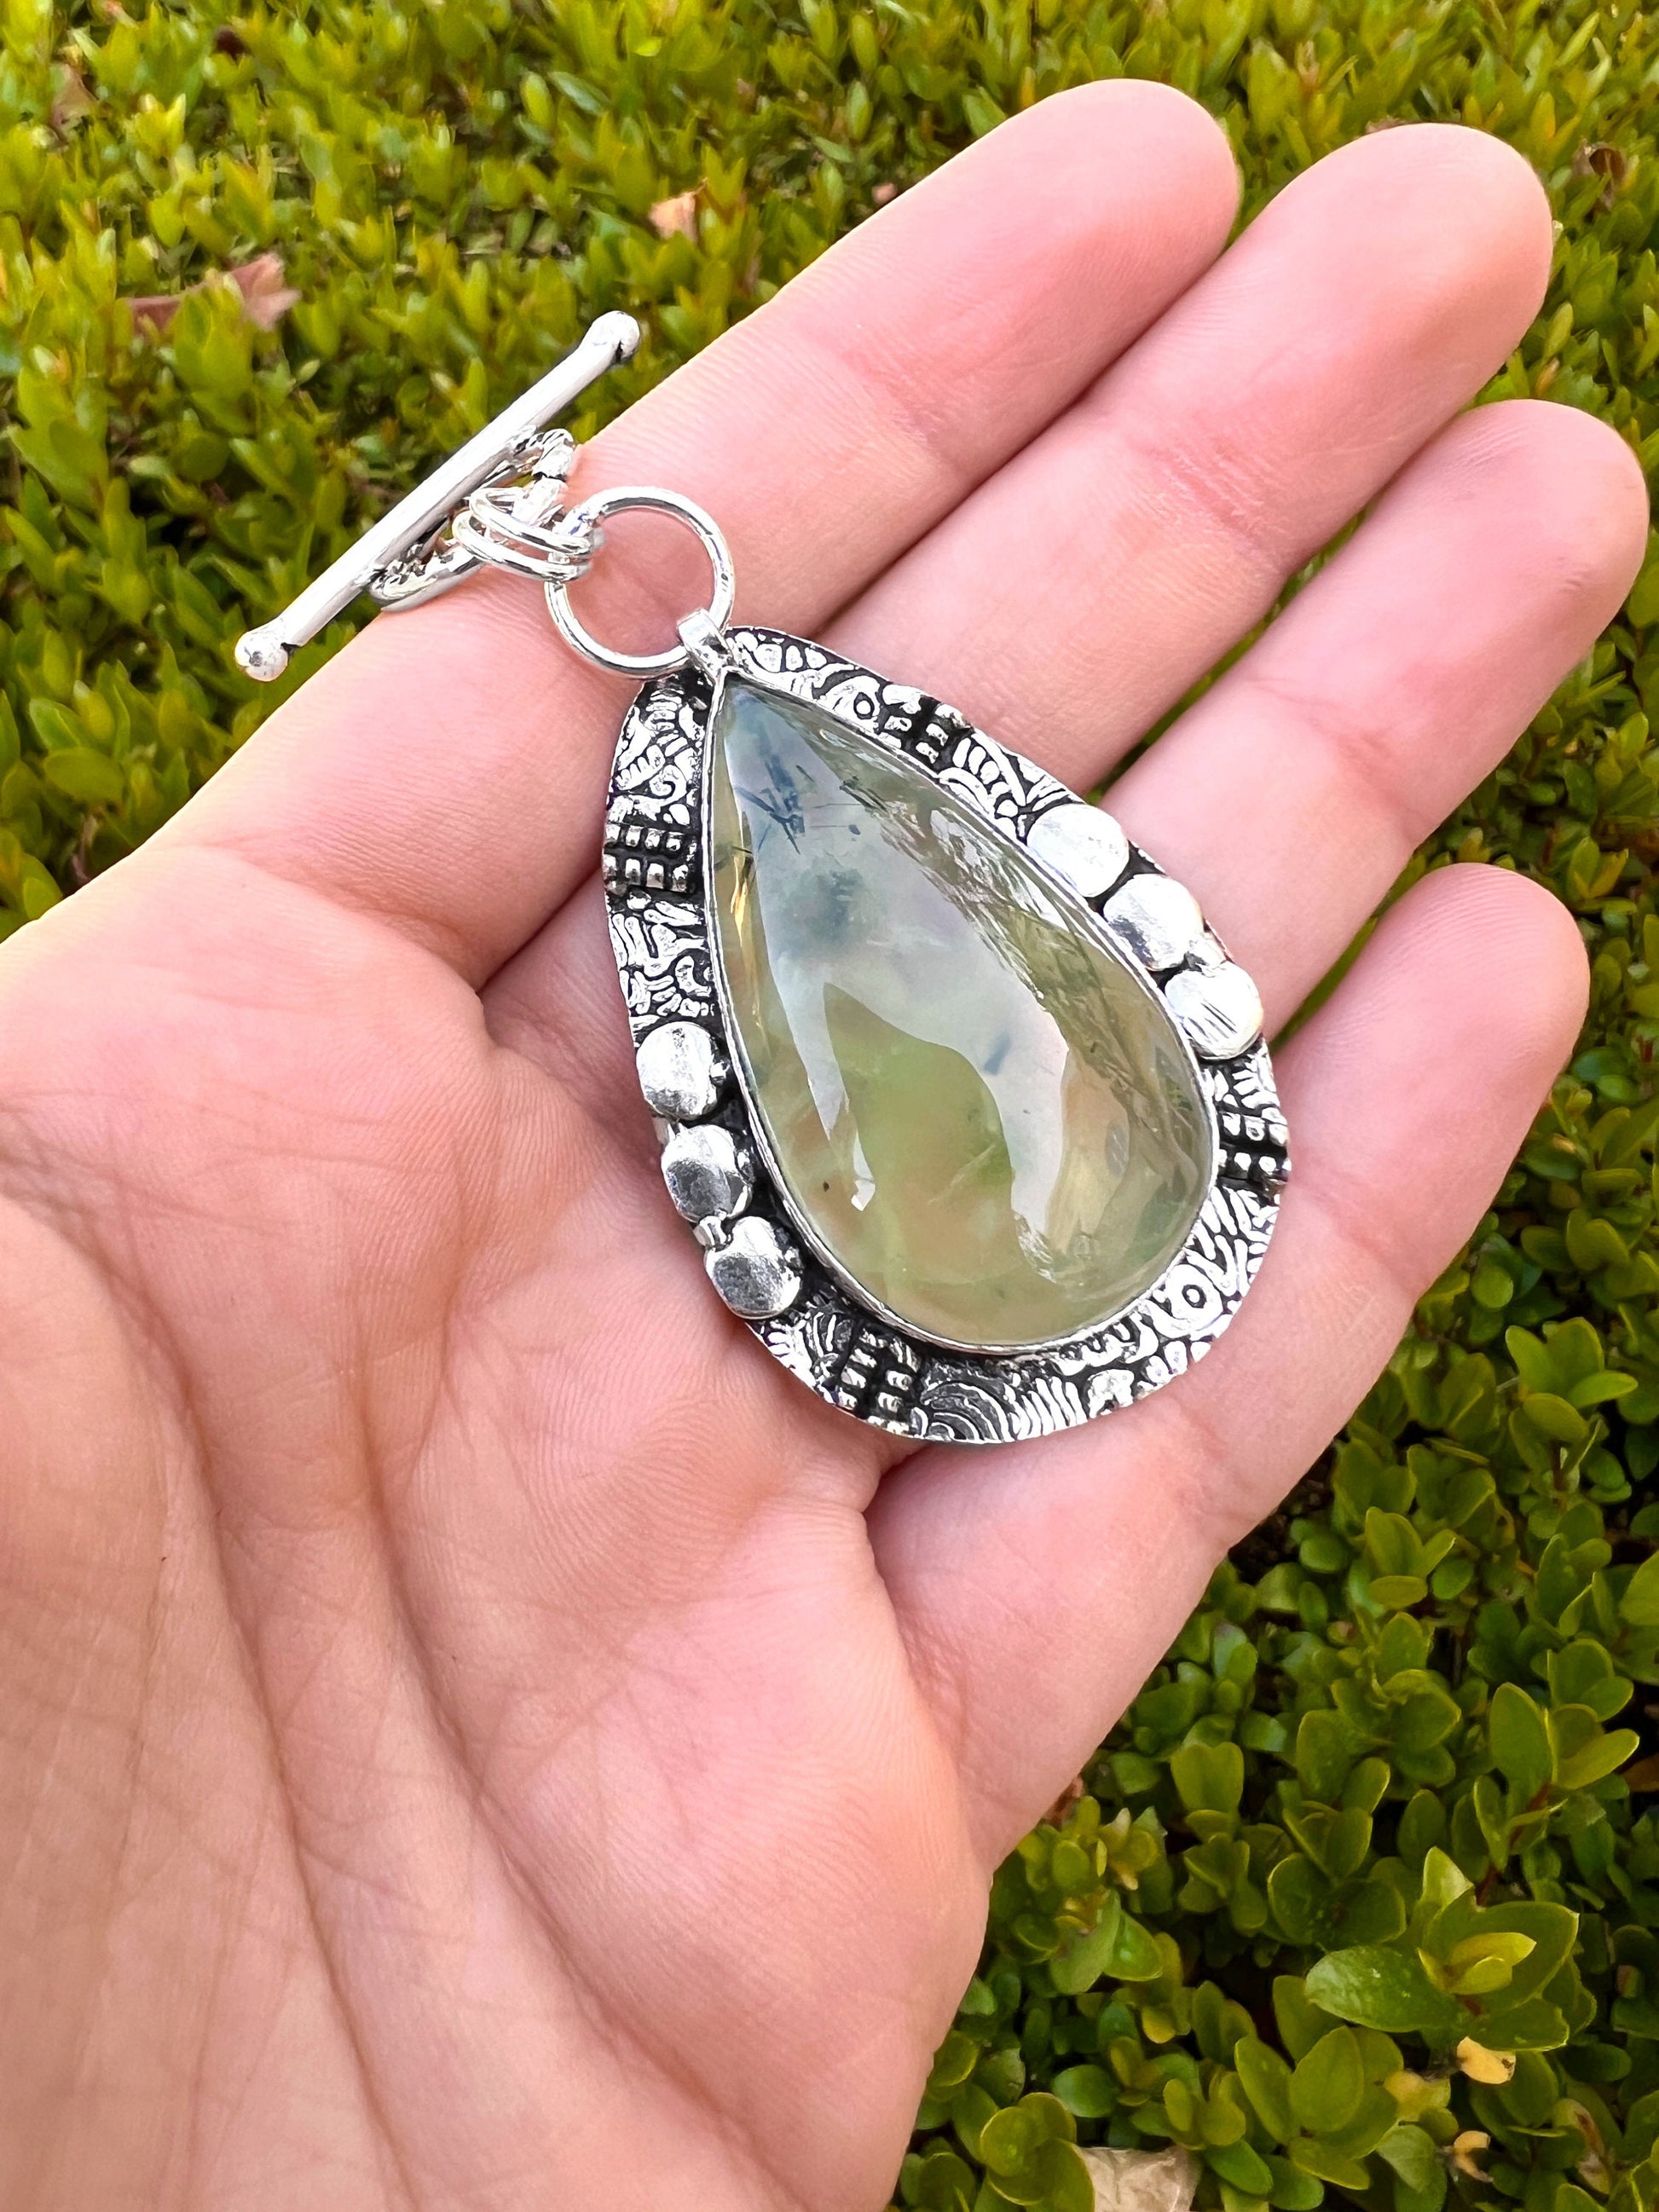 Prehnite Gemstone Pendant Sterling Silver Statement Pendant Gypsy Jewelry Unique Gift For Her